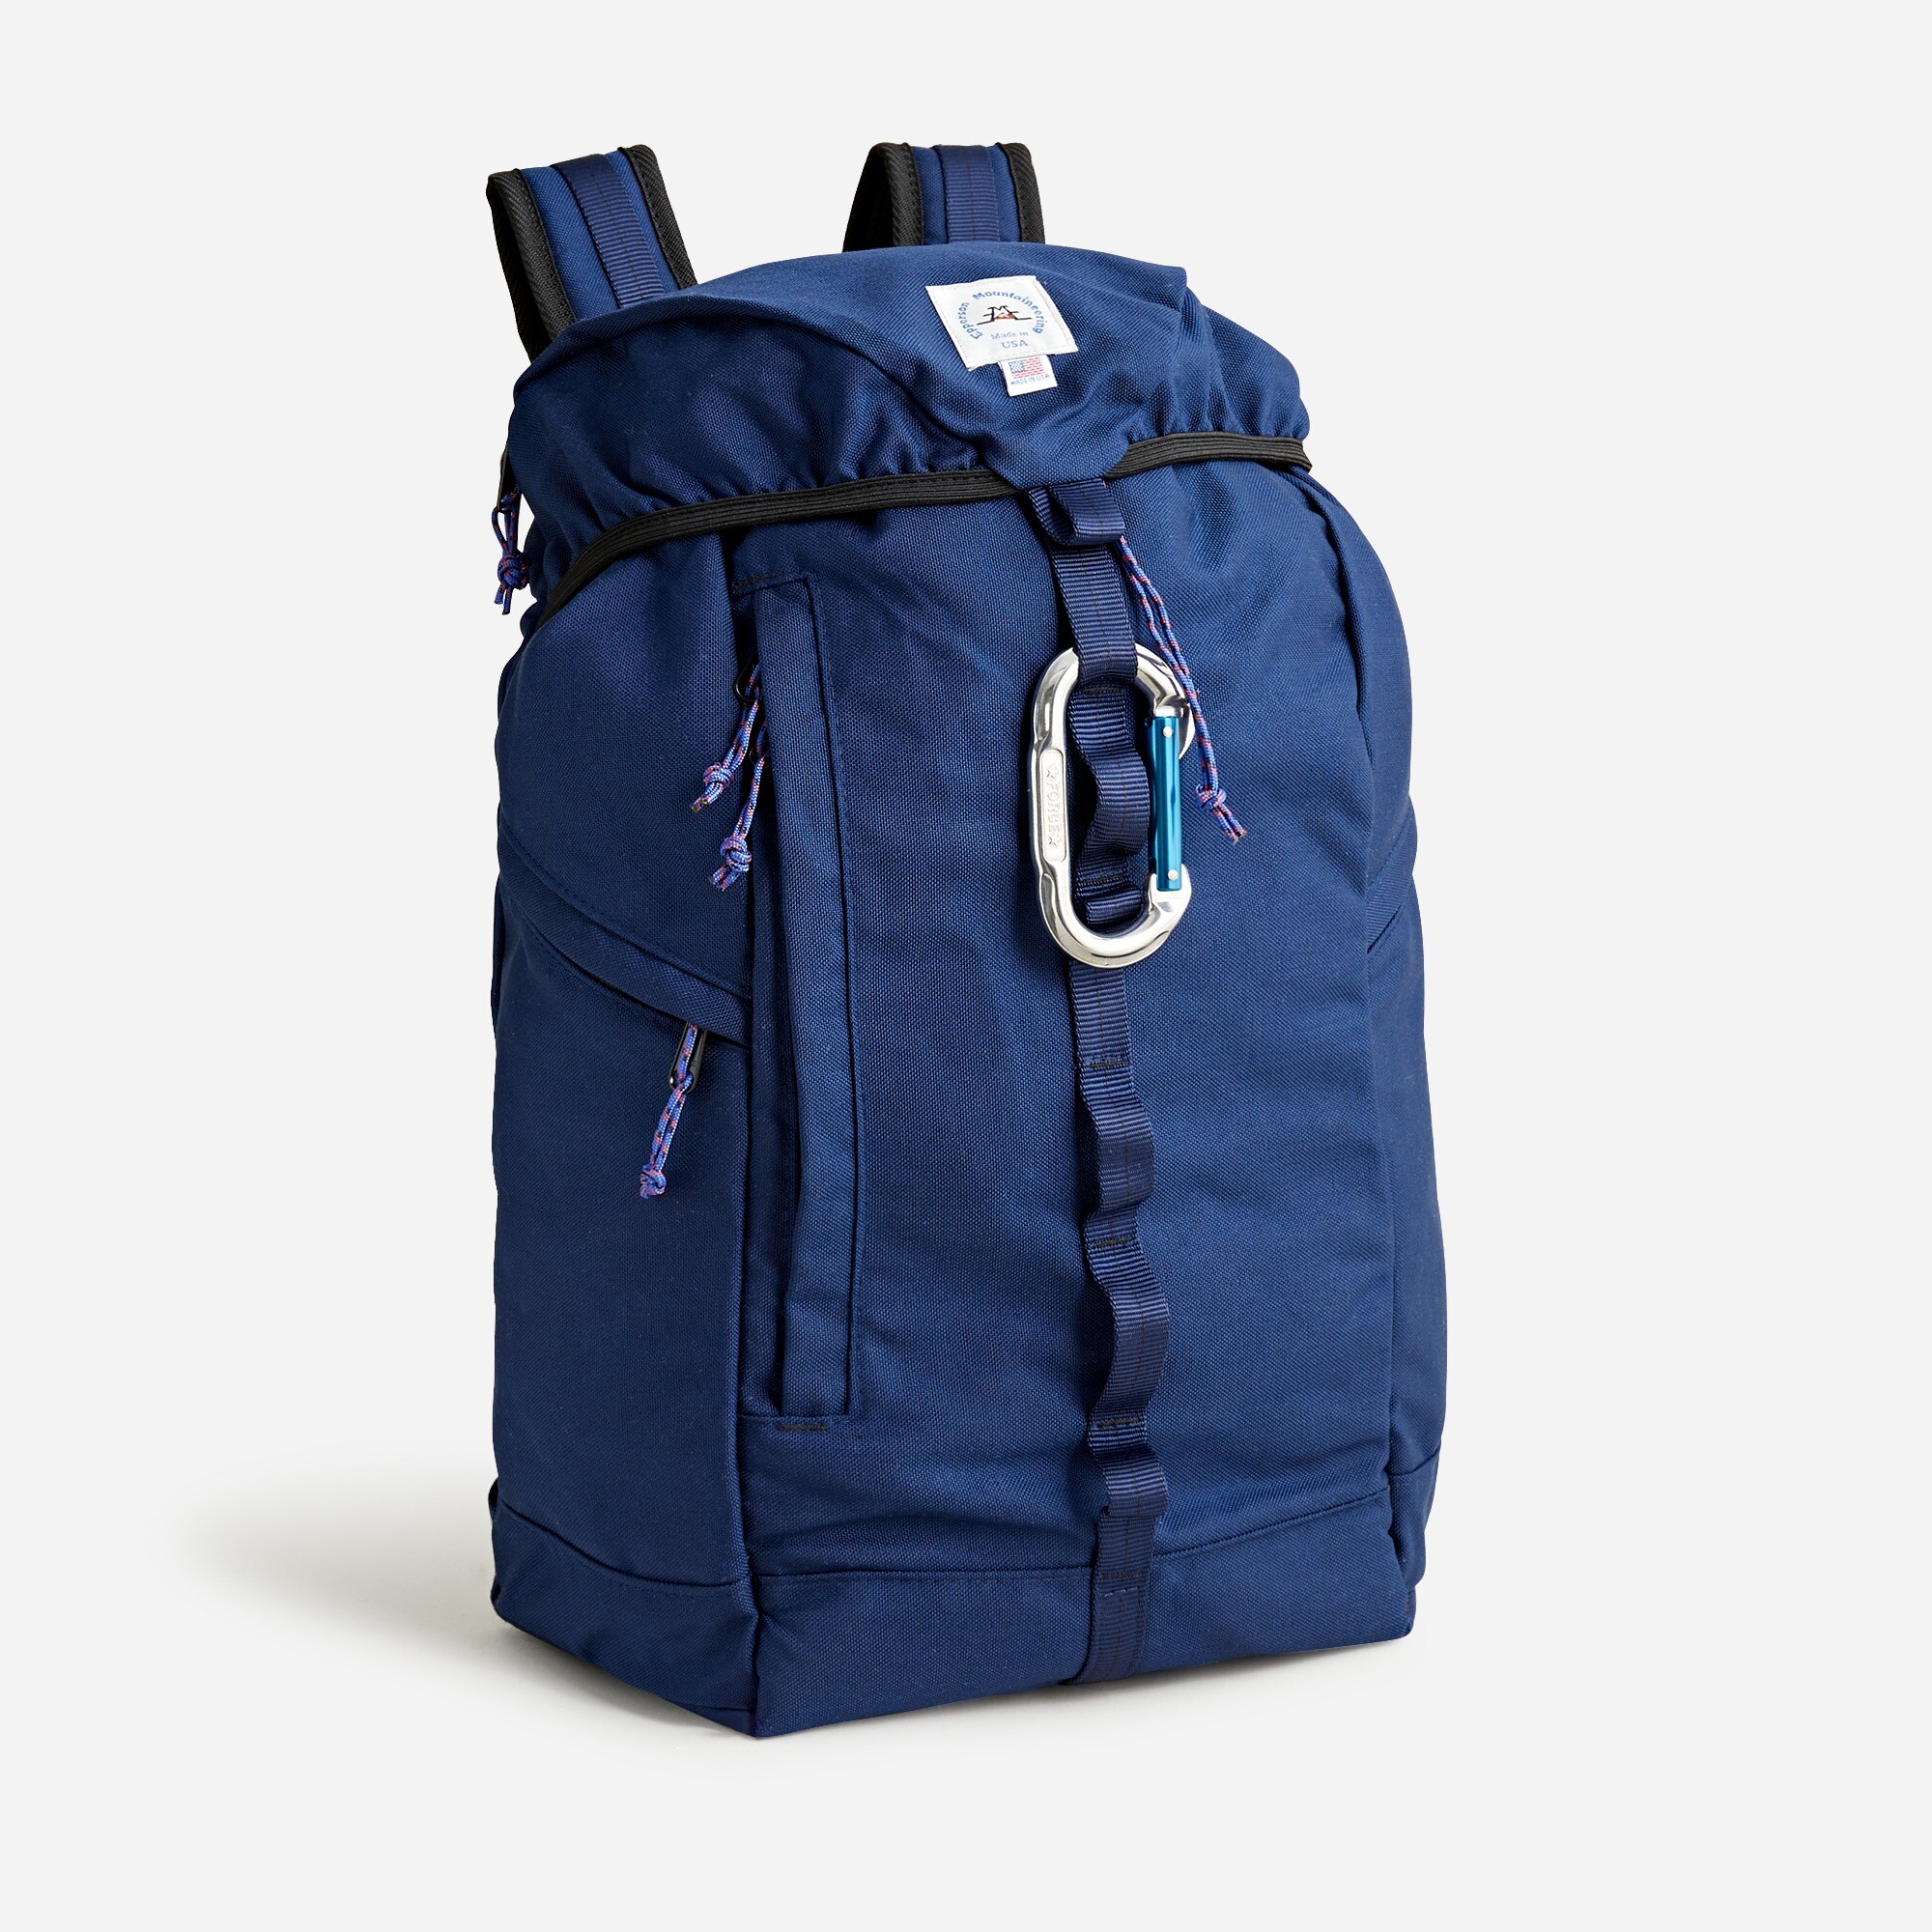  Epperson Mountaineering™ large climb pack